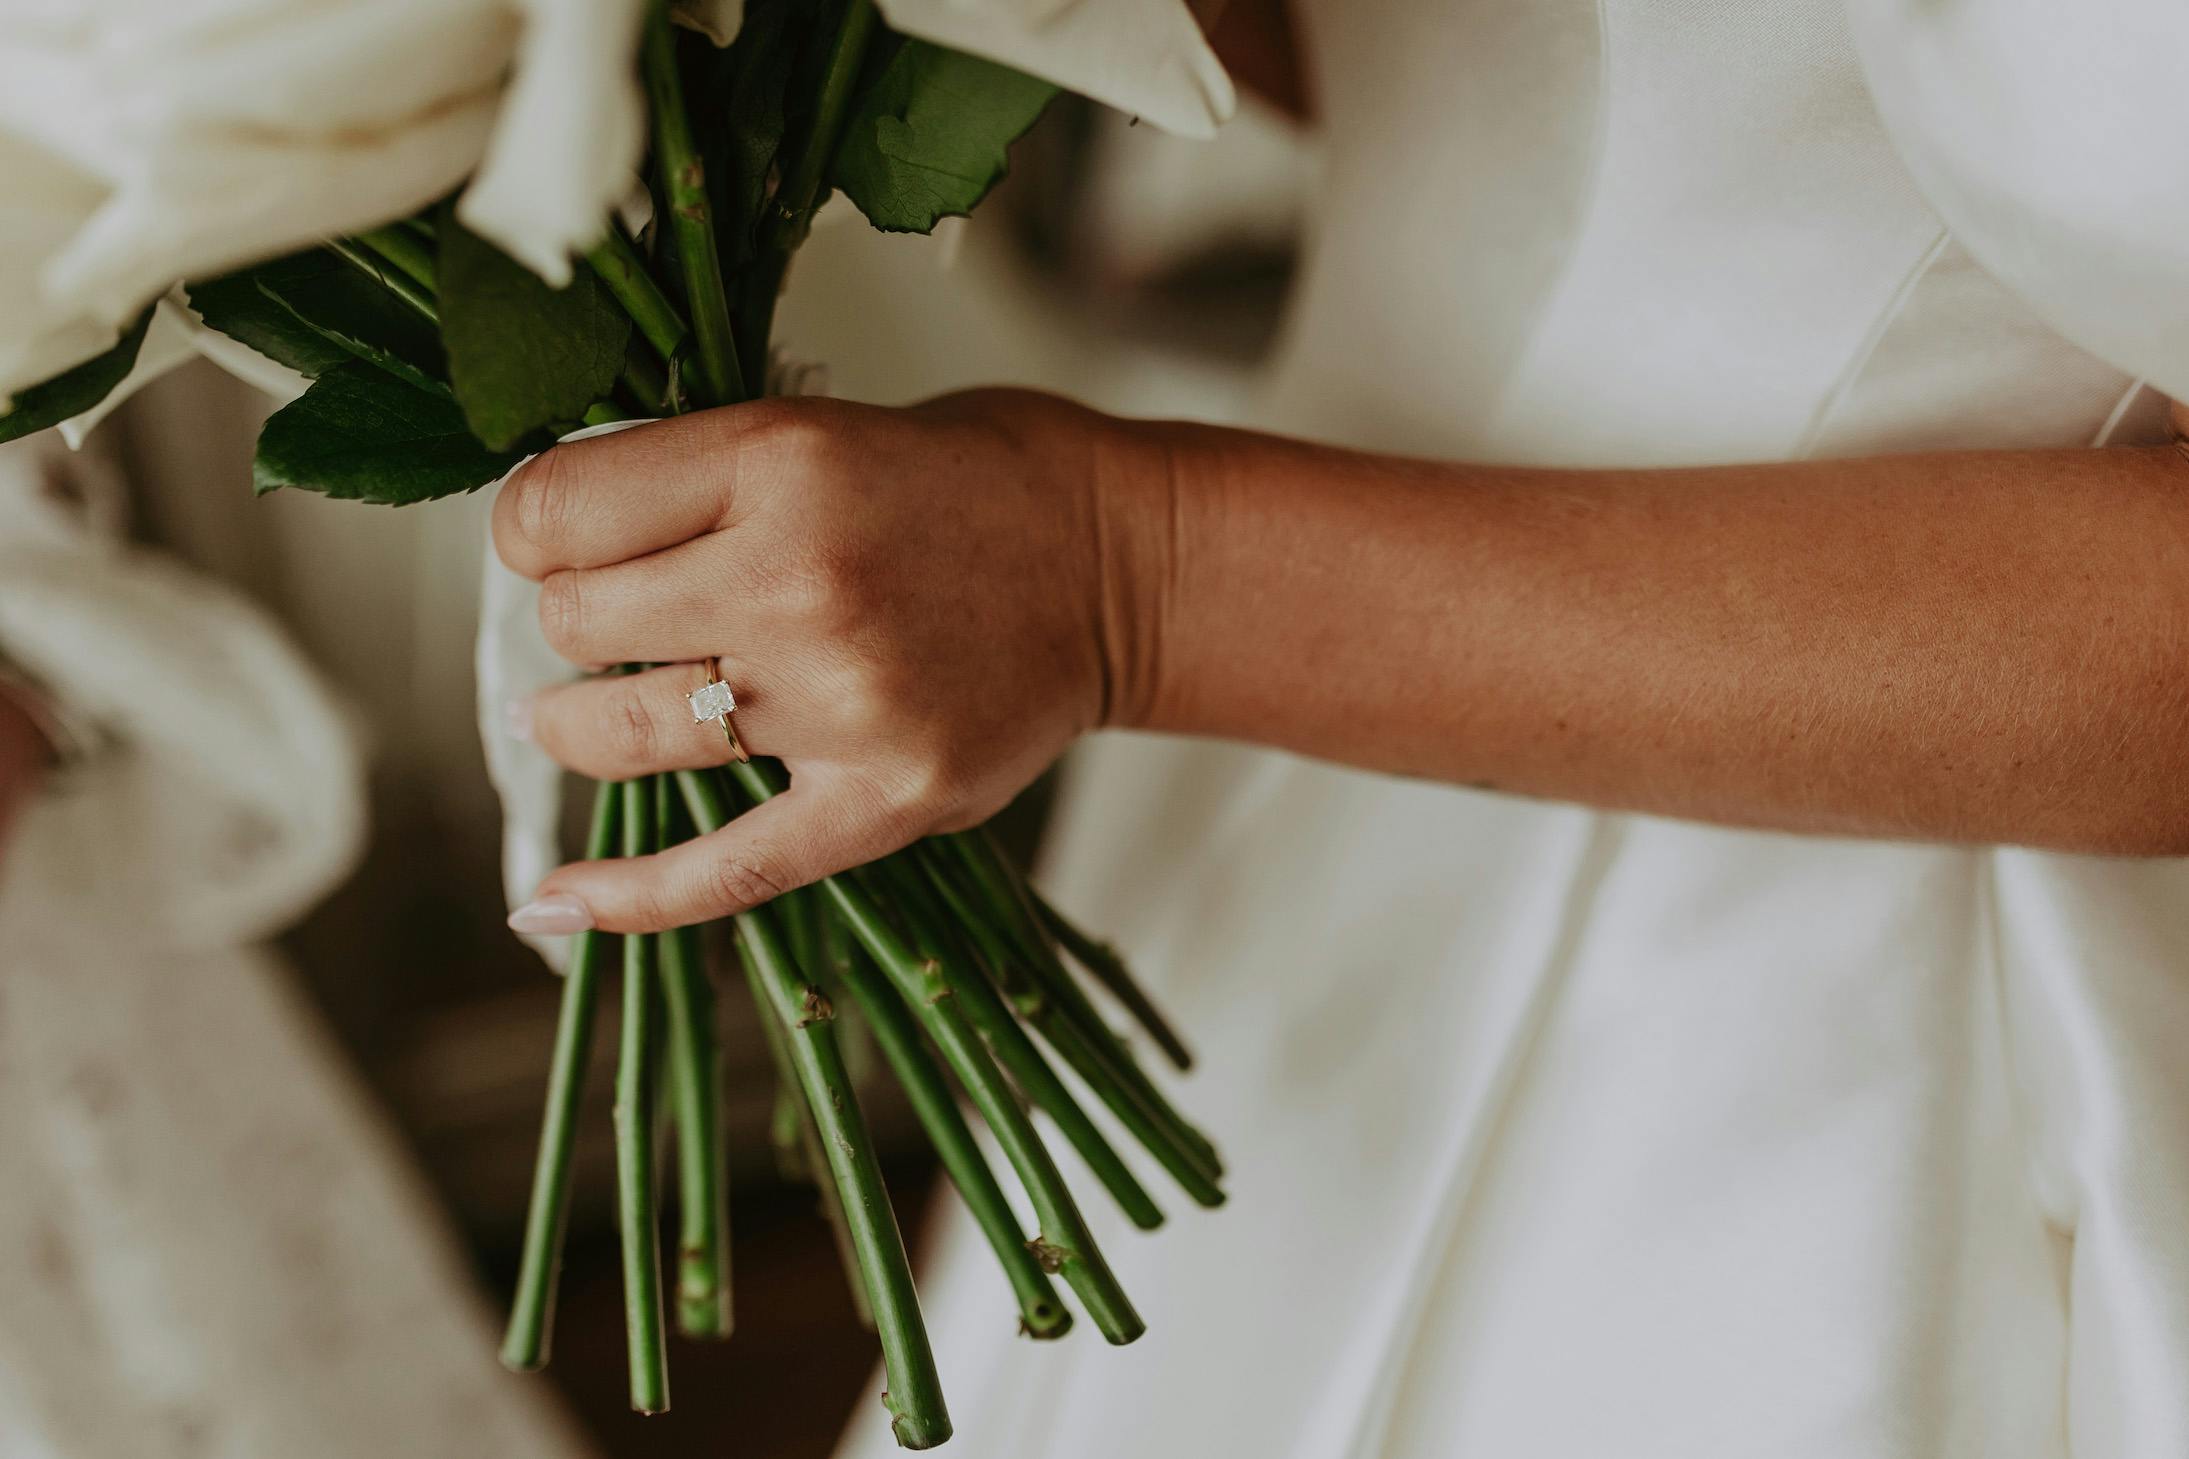 A close-up of a person’s hand holding a bouquet of white flowers. The person is wearing a white outfit, and visible on their ring finger is a diamond engagement ring. The background is blurred, keeping the focus on the hand, flowers, and ring.